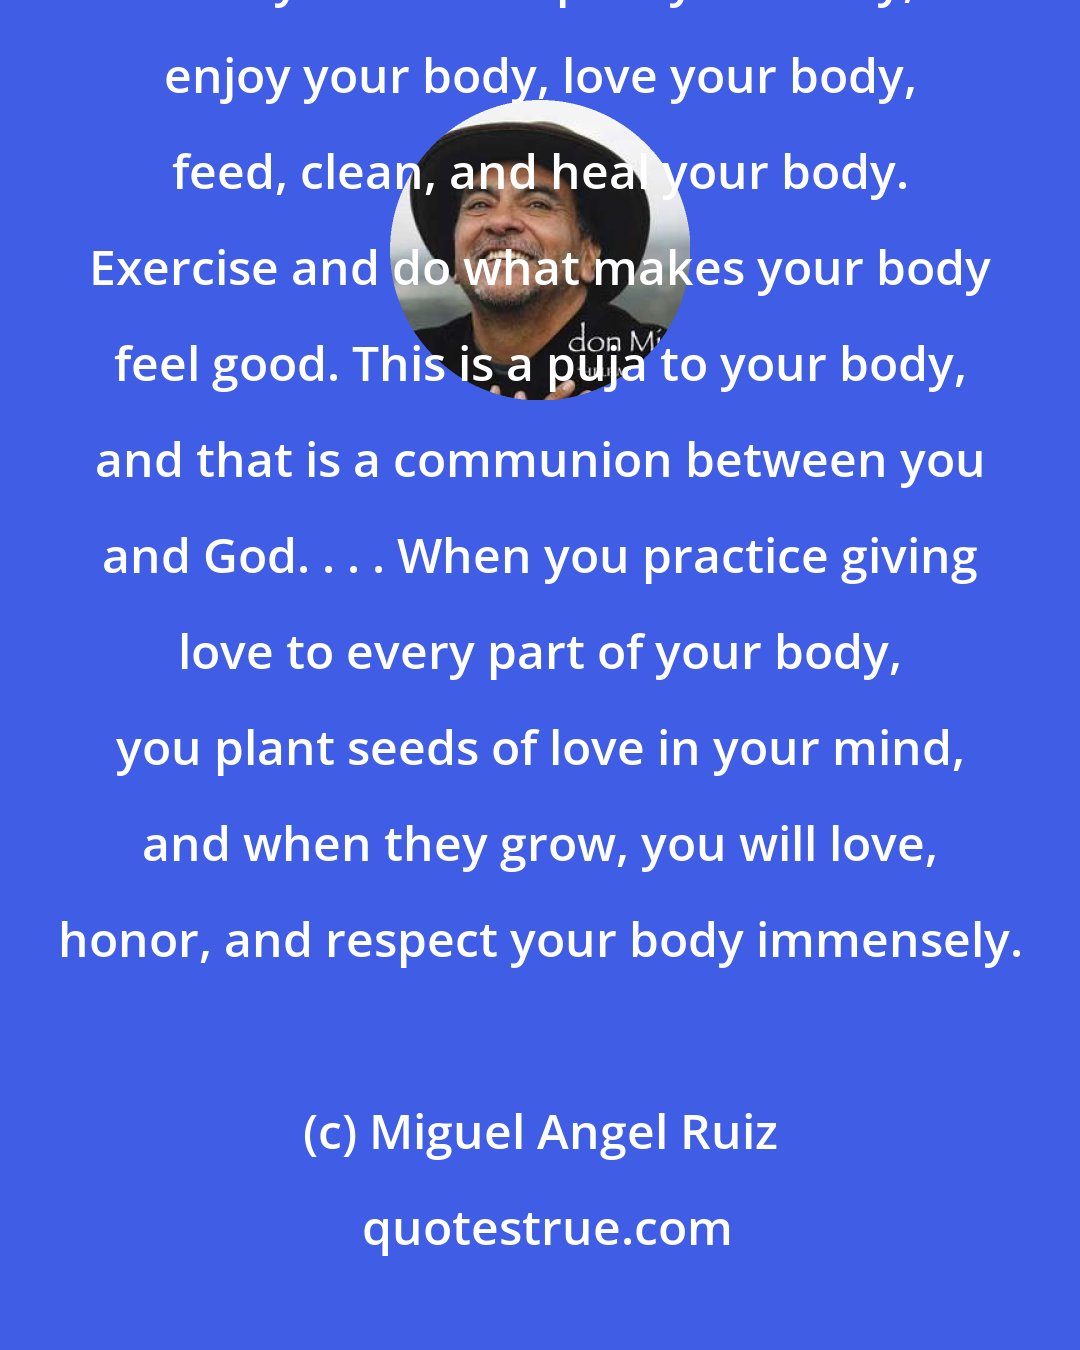 Miguel Angel Ruiz: You have to stand up and be a human. You have to honor the man or woman that you are. Respect your body, enjoy your body, love your body, feed, clean, and heal your body. Exercise and do what makes your body feel good. This is a puja to your body, and that is a communion between you and God. . . . When you practice giving love to every part of your body, you plant seeds of love in your mind, and when they grow, you will love, honor, and respect your body immensely.